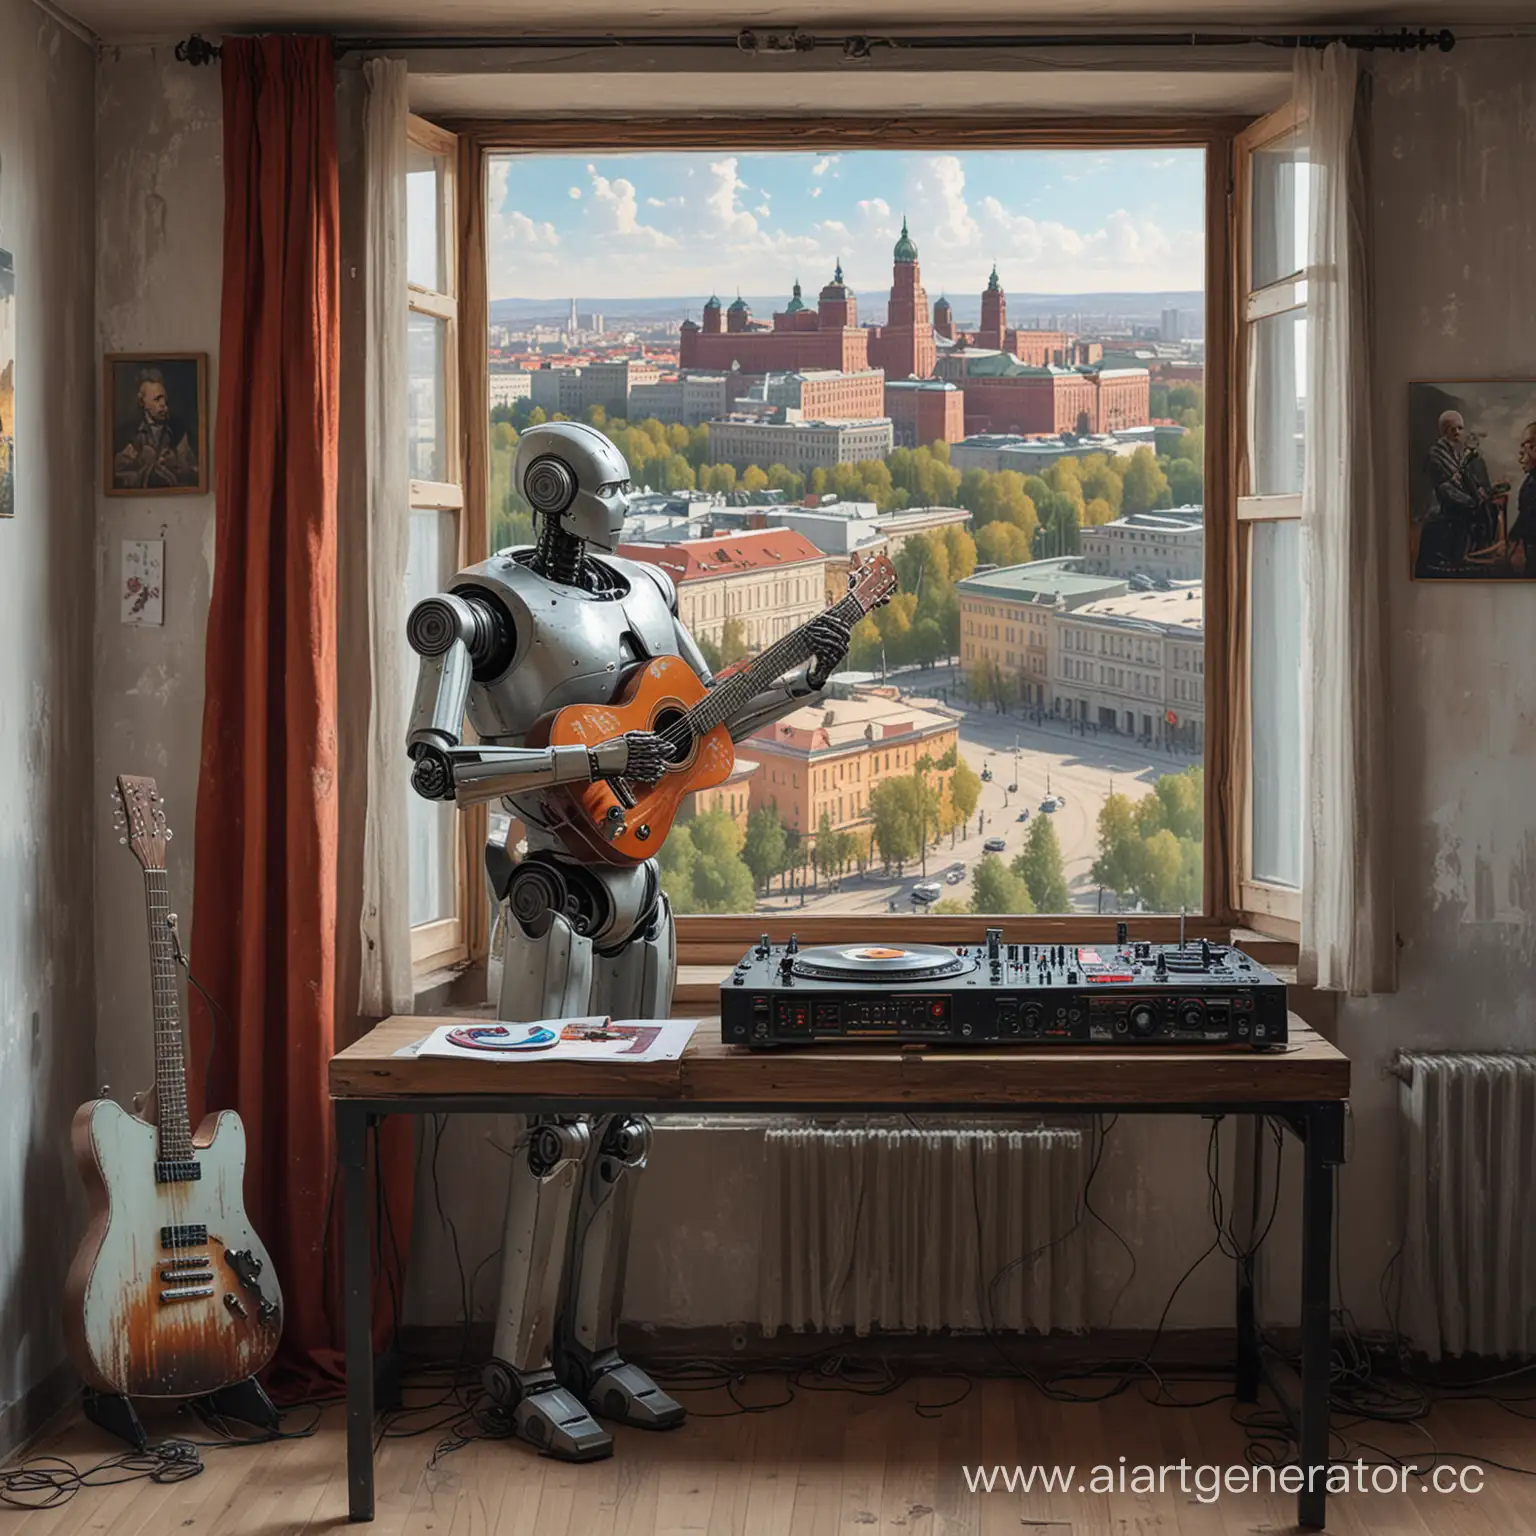 AI-Robot-DJ-Playing-Guitar-in-Soviet-City-Scene-with-Lenin-Painting